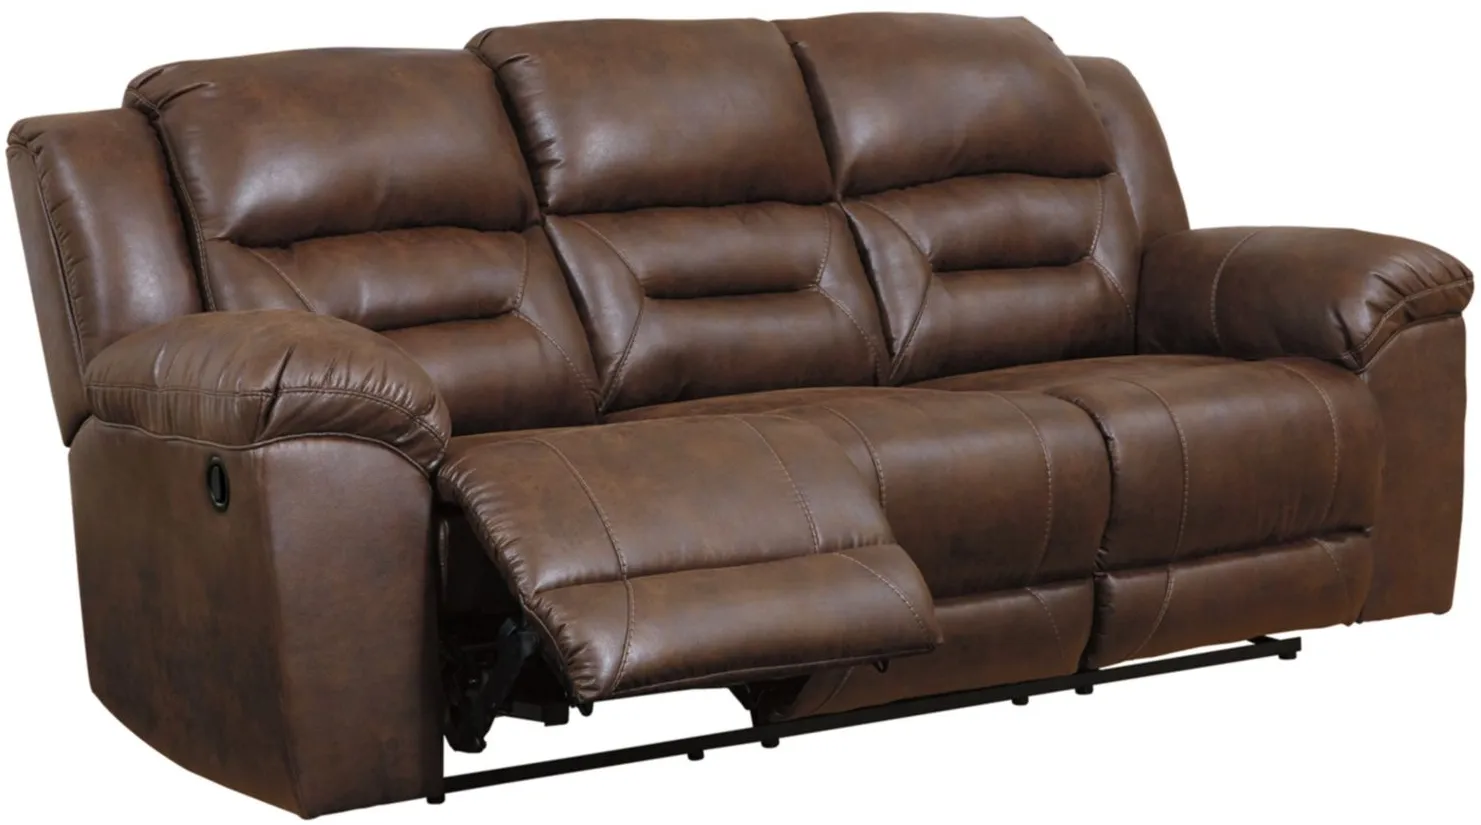 Stoneland Reclining Sofa in Chocolate by Ashley Furniture